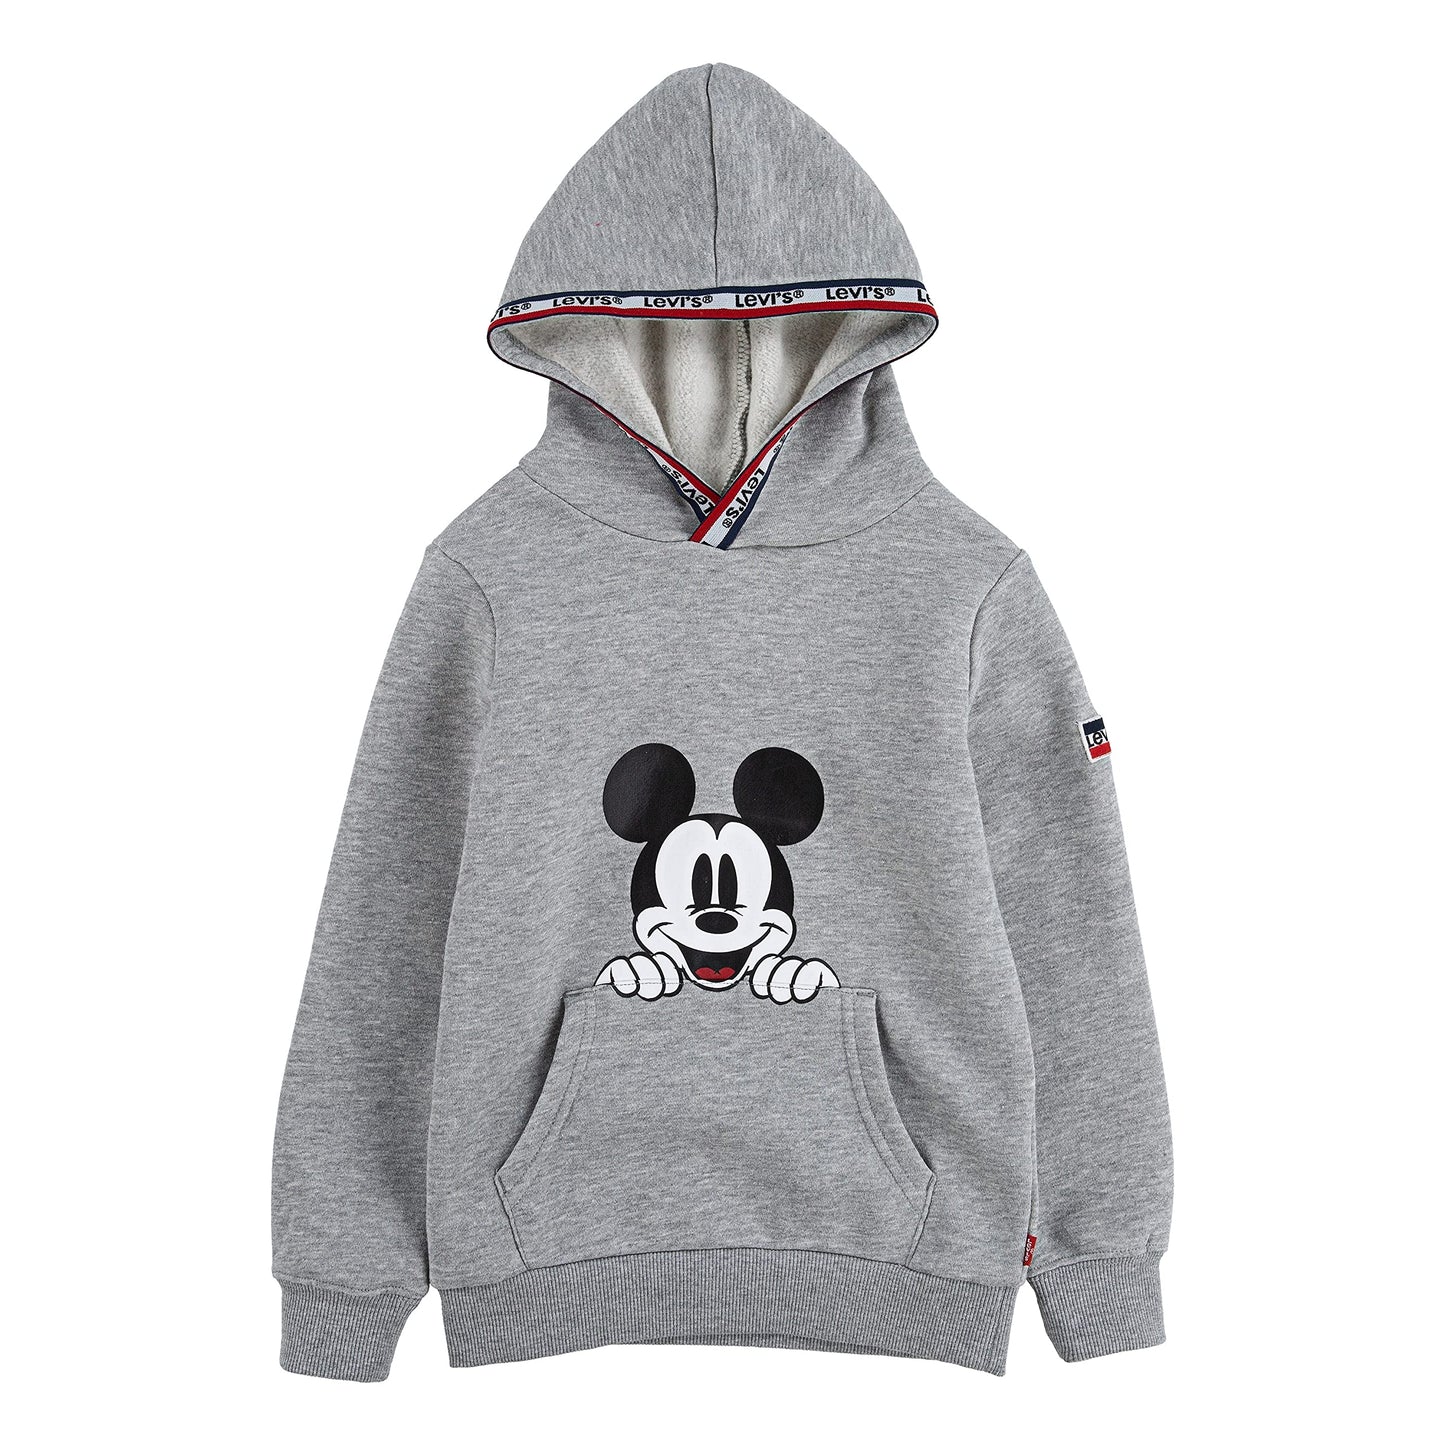 Image 1 of Levi's x Disney Mickey Mouse Hoodie (Toddler)